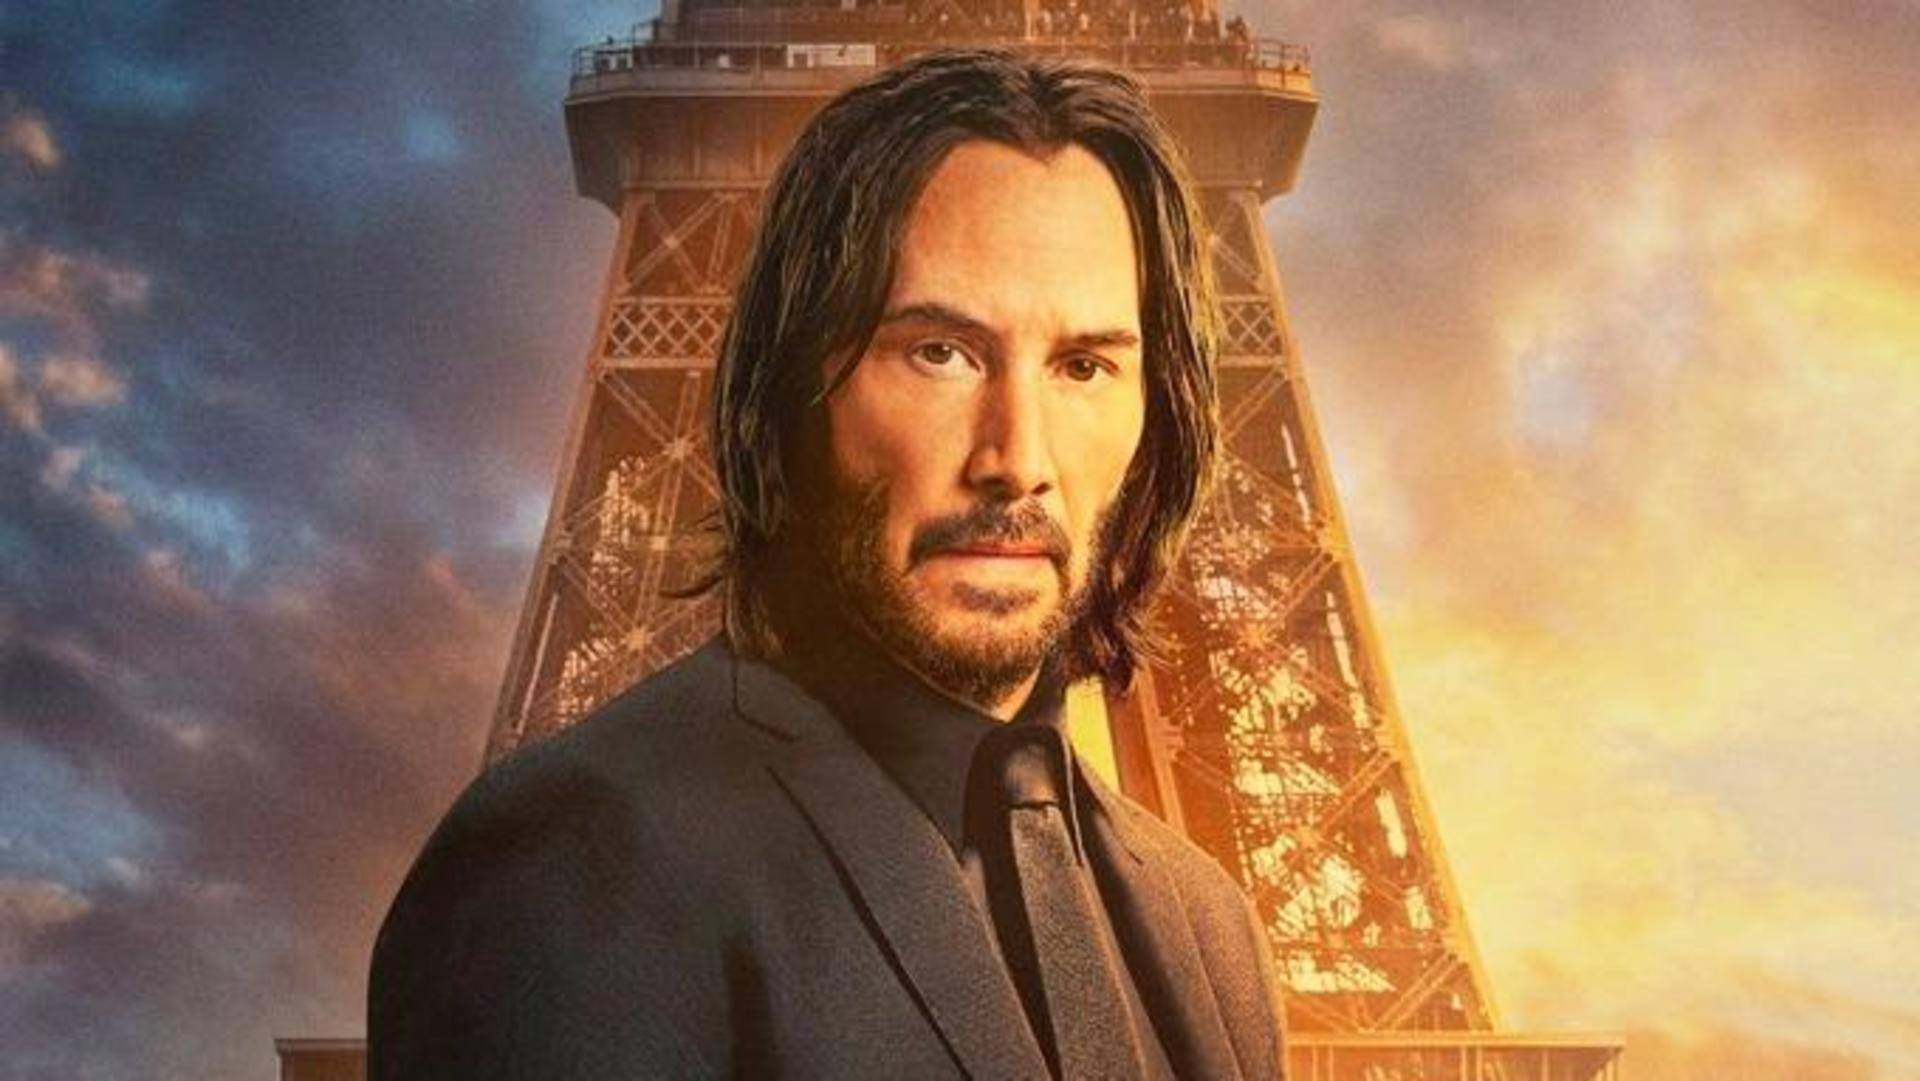 'John Wick 4' early reactions promise a spectacular sequel